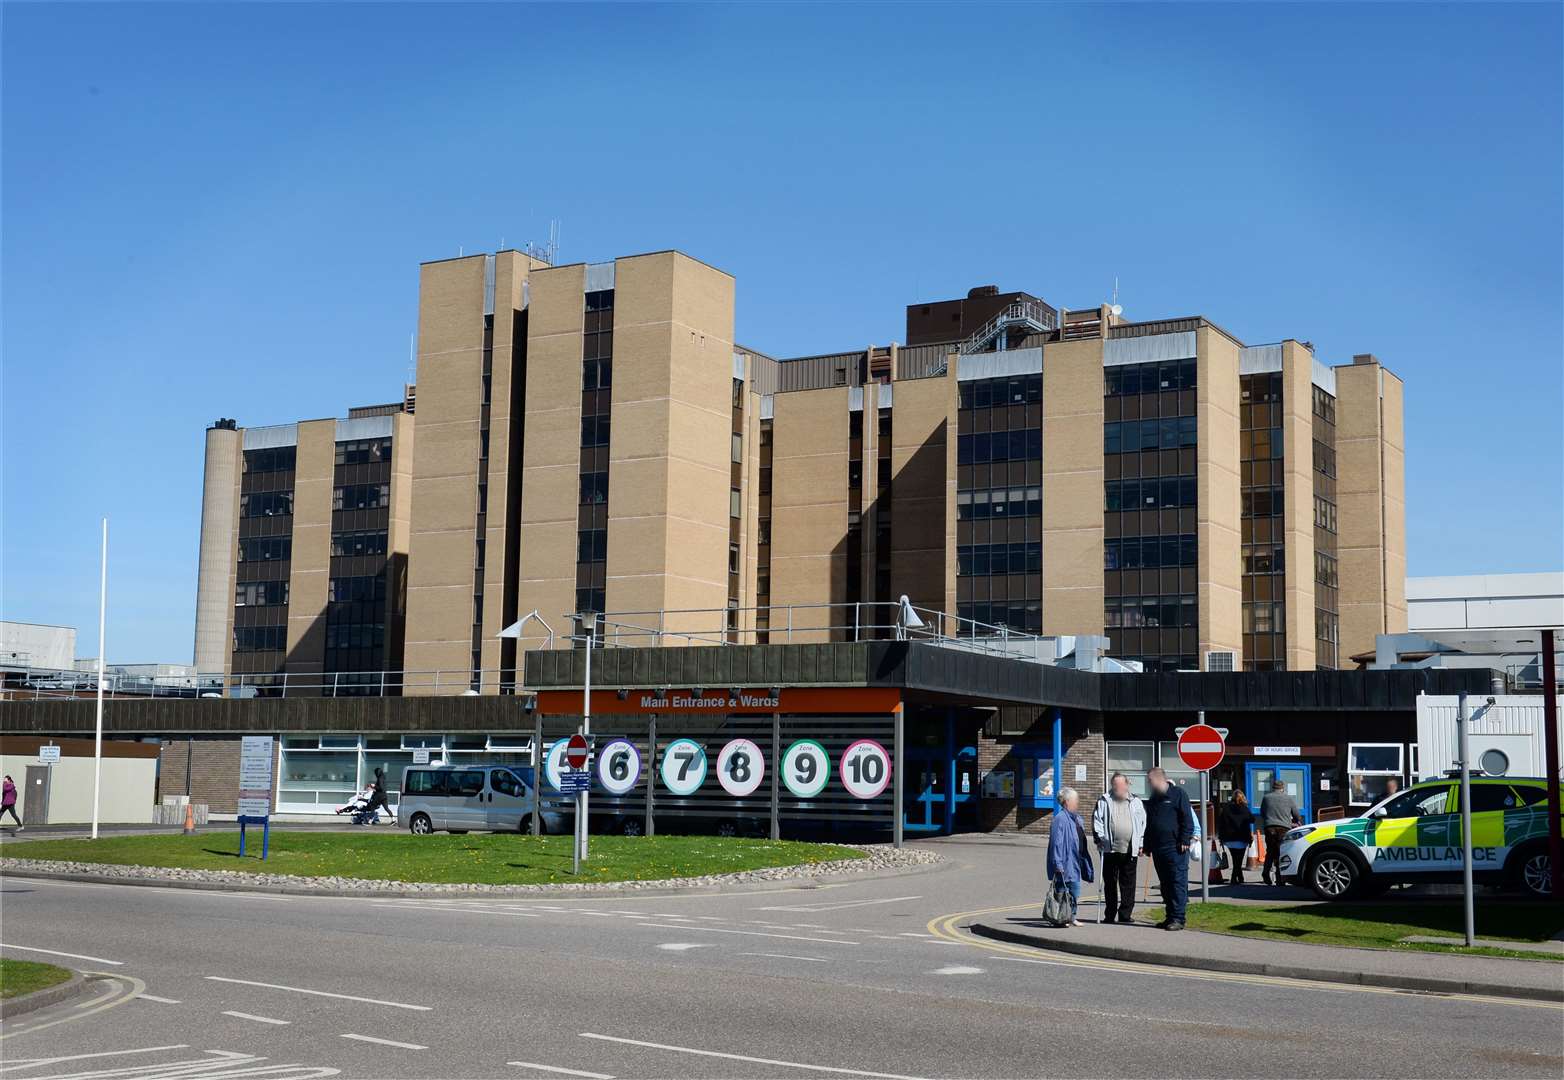 No further cases were detected at the ward overnight on Saturday.